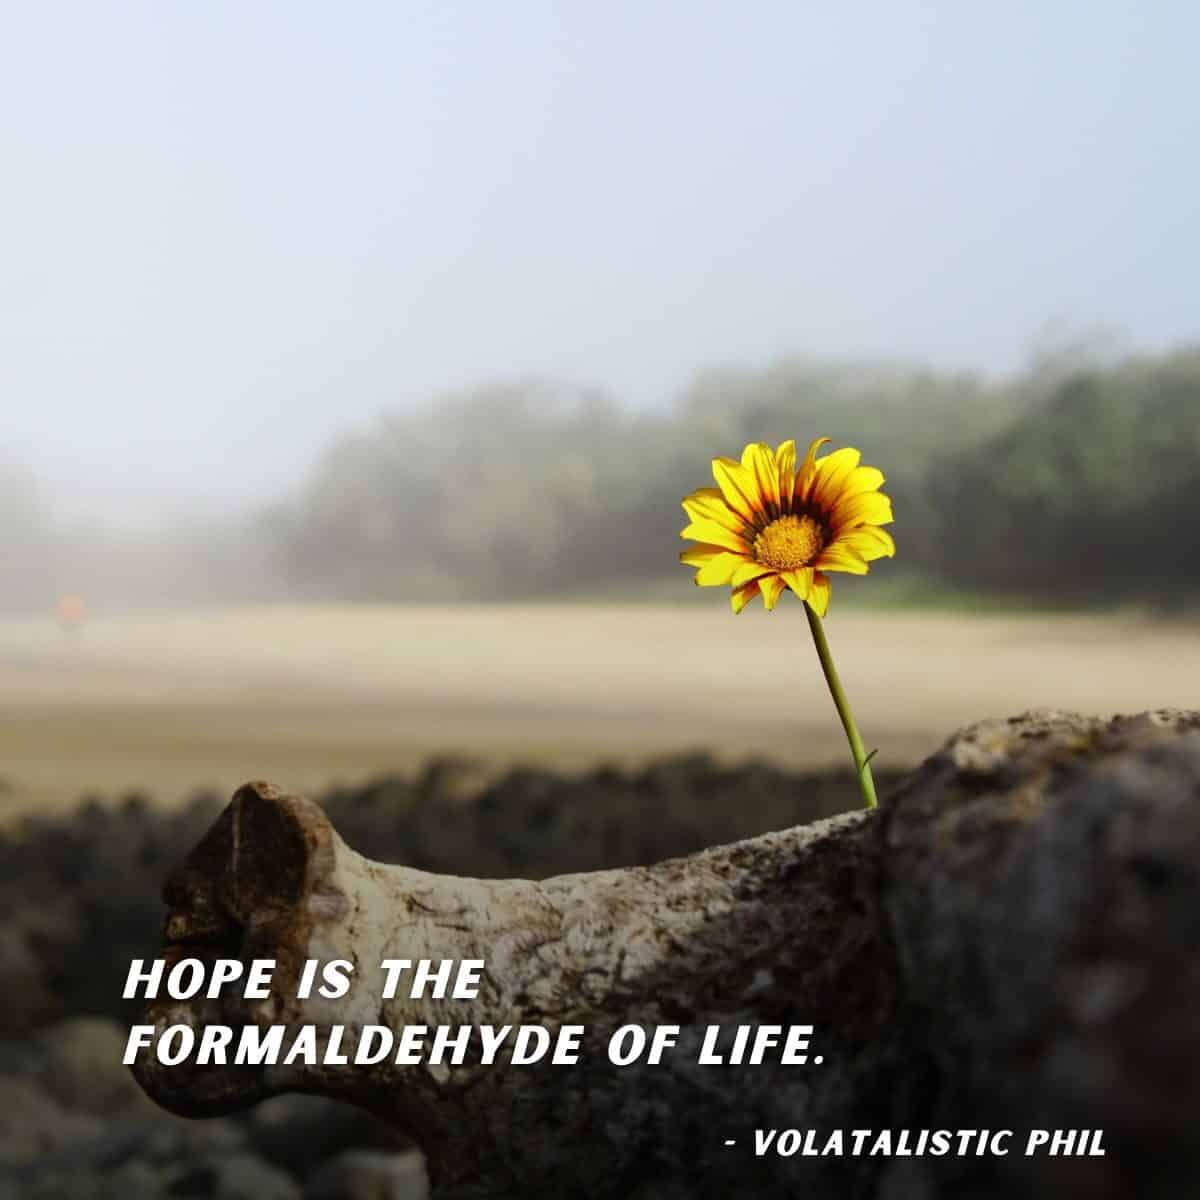 Hope is the formaldehyde of life